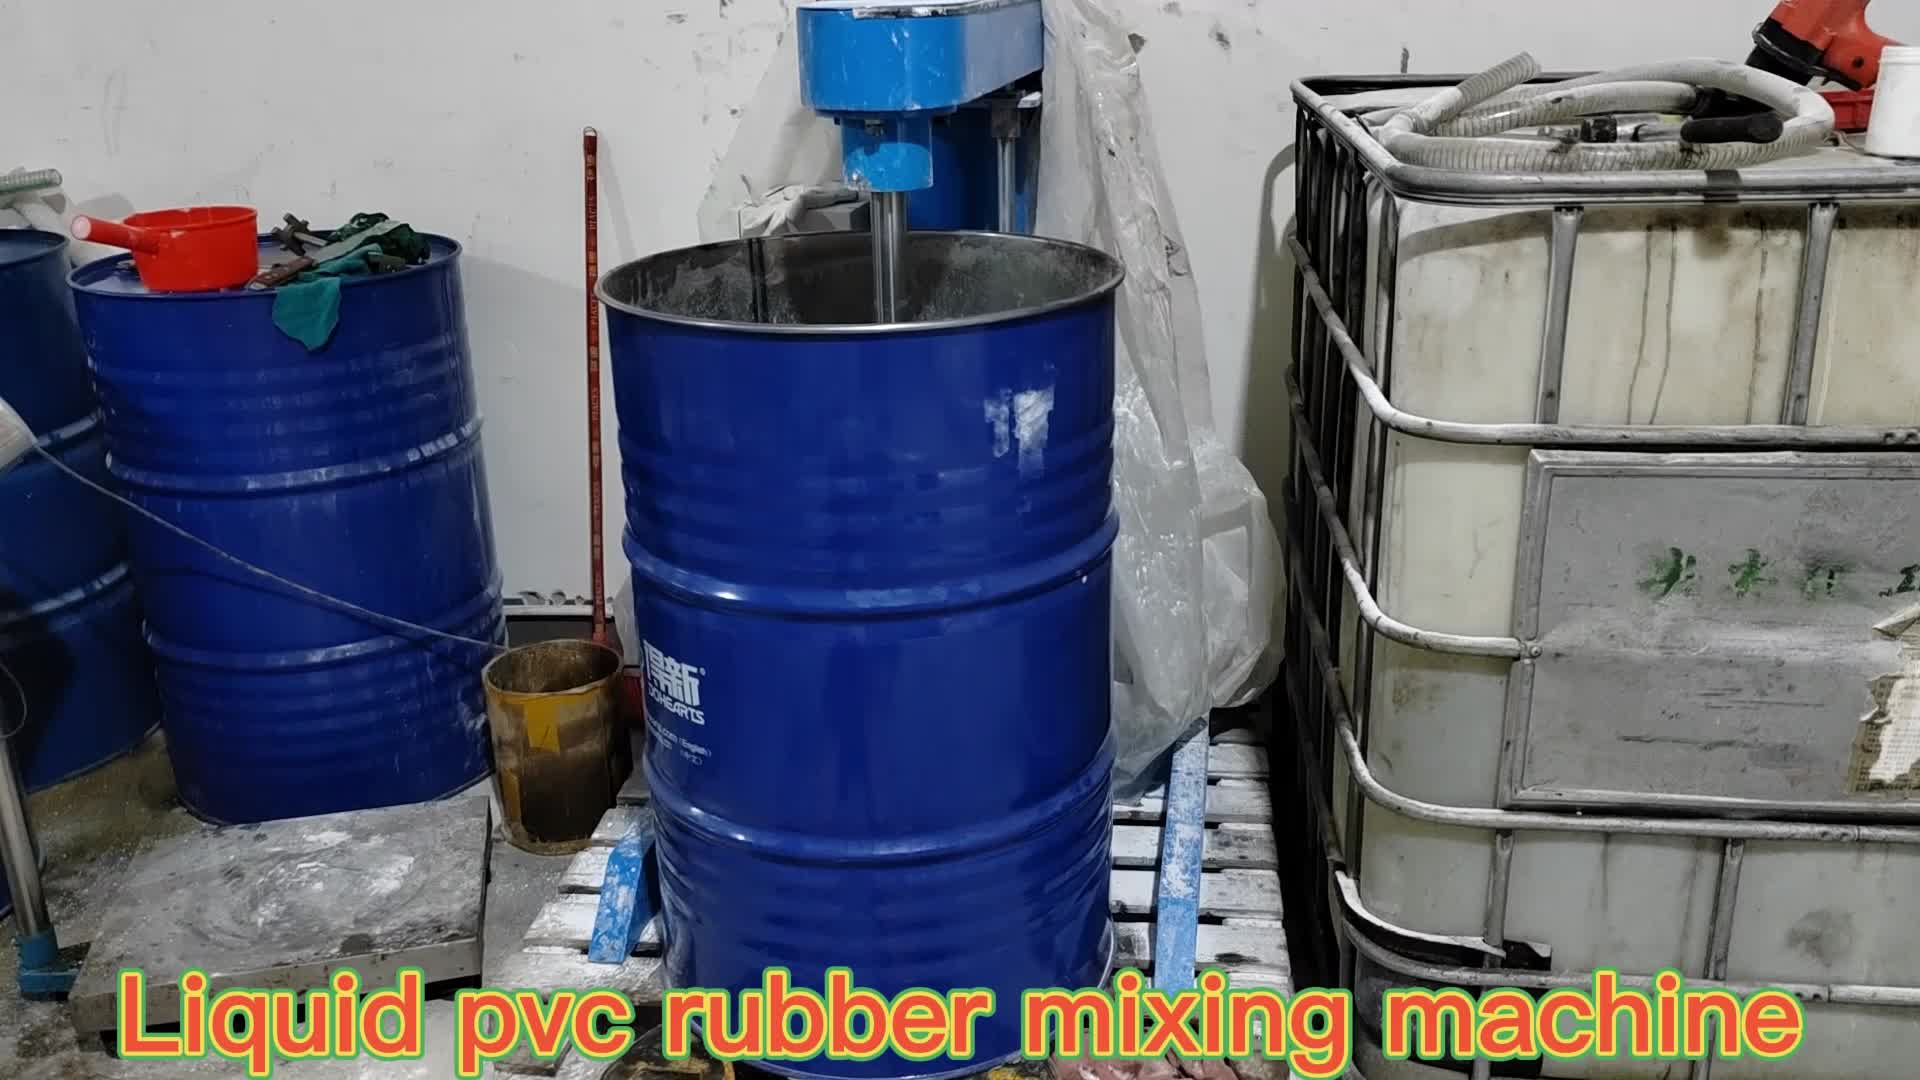 Liquid pvc rubber mixing machine for mixing pvc raw material and colors.mp4